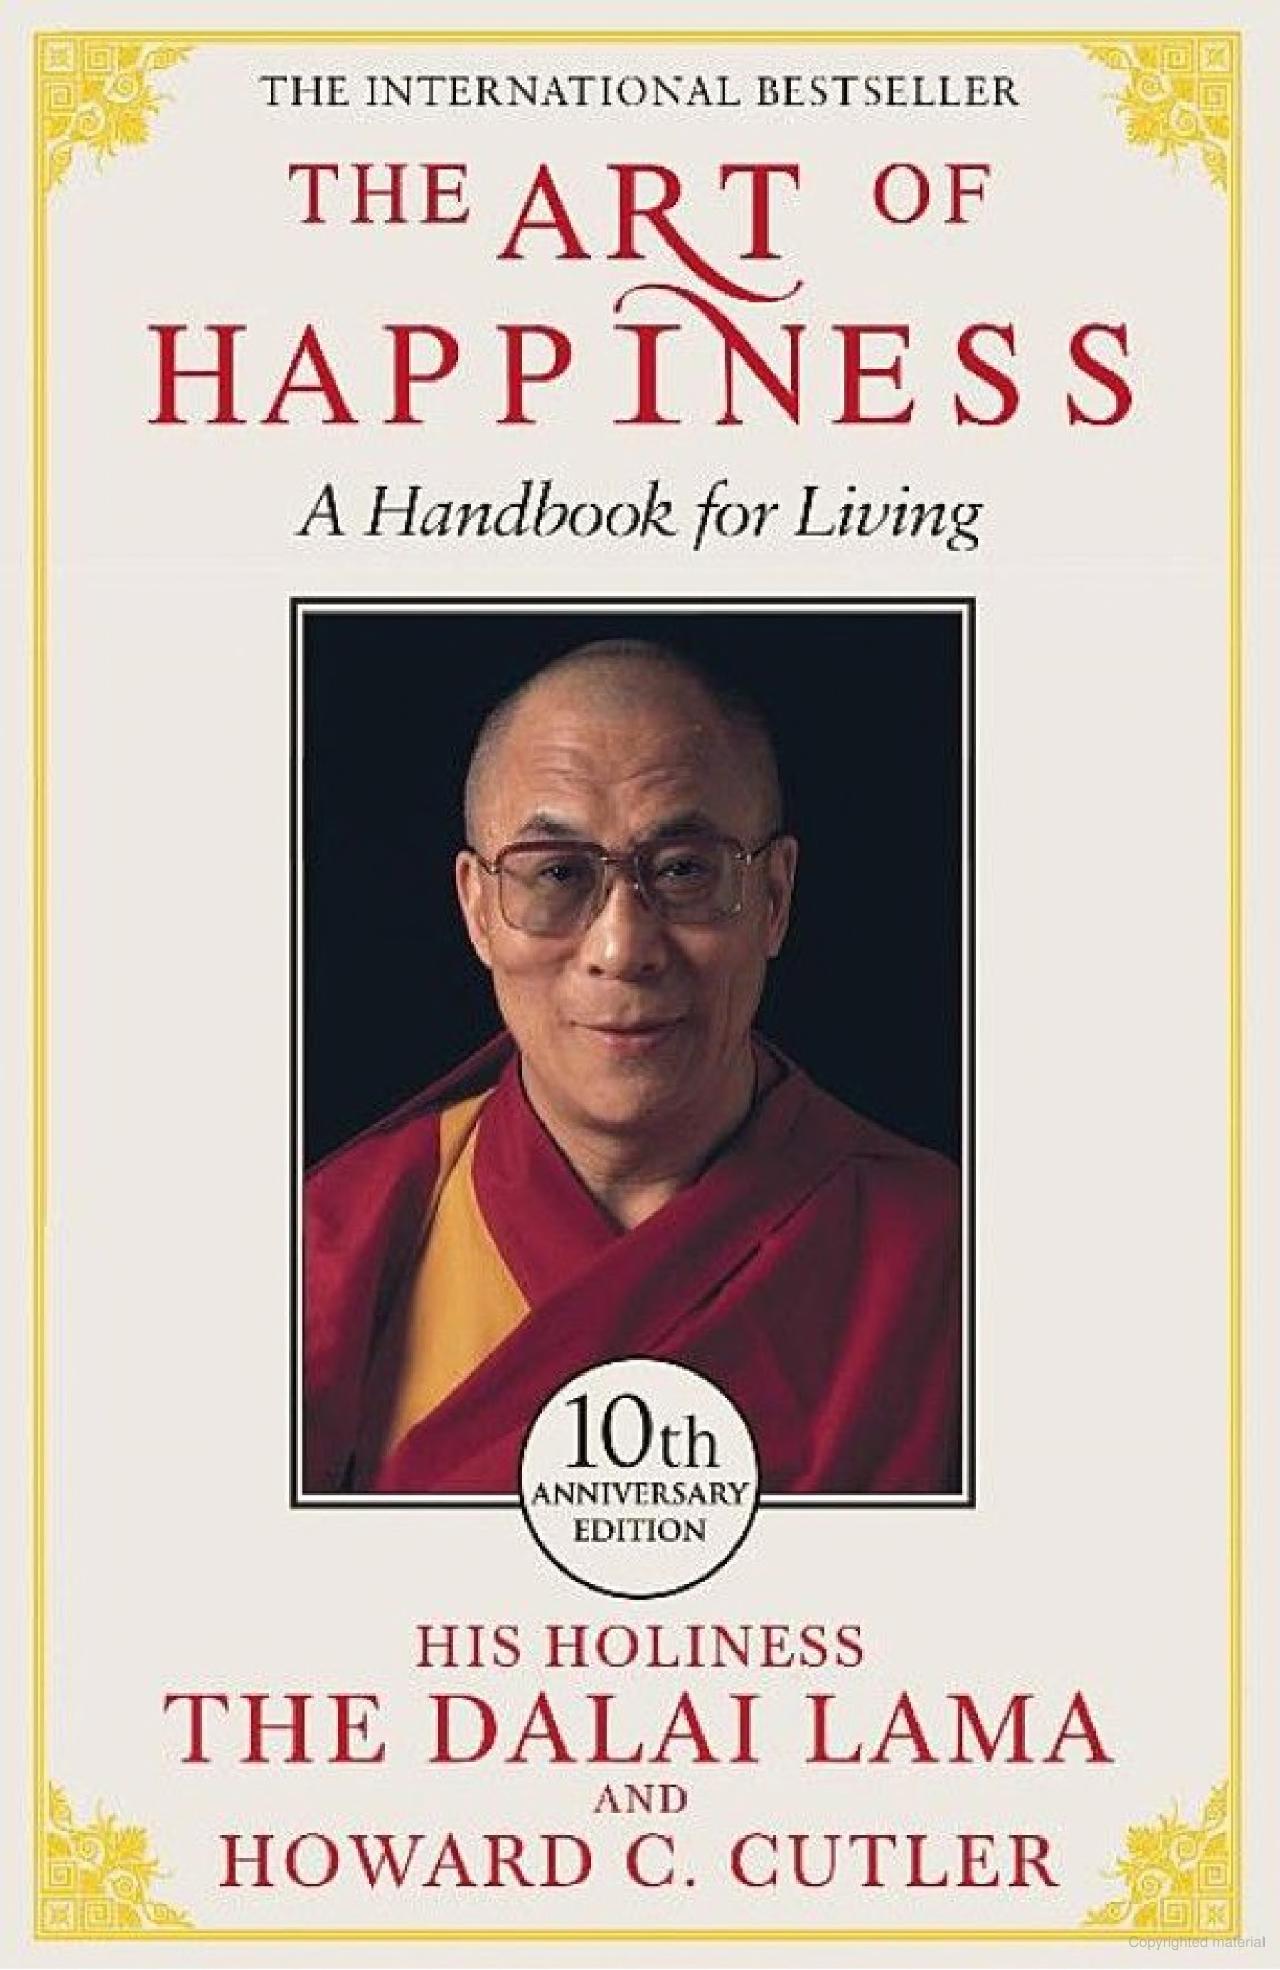 The Art of Happiness Book Summary